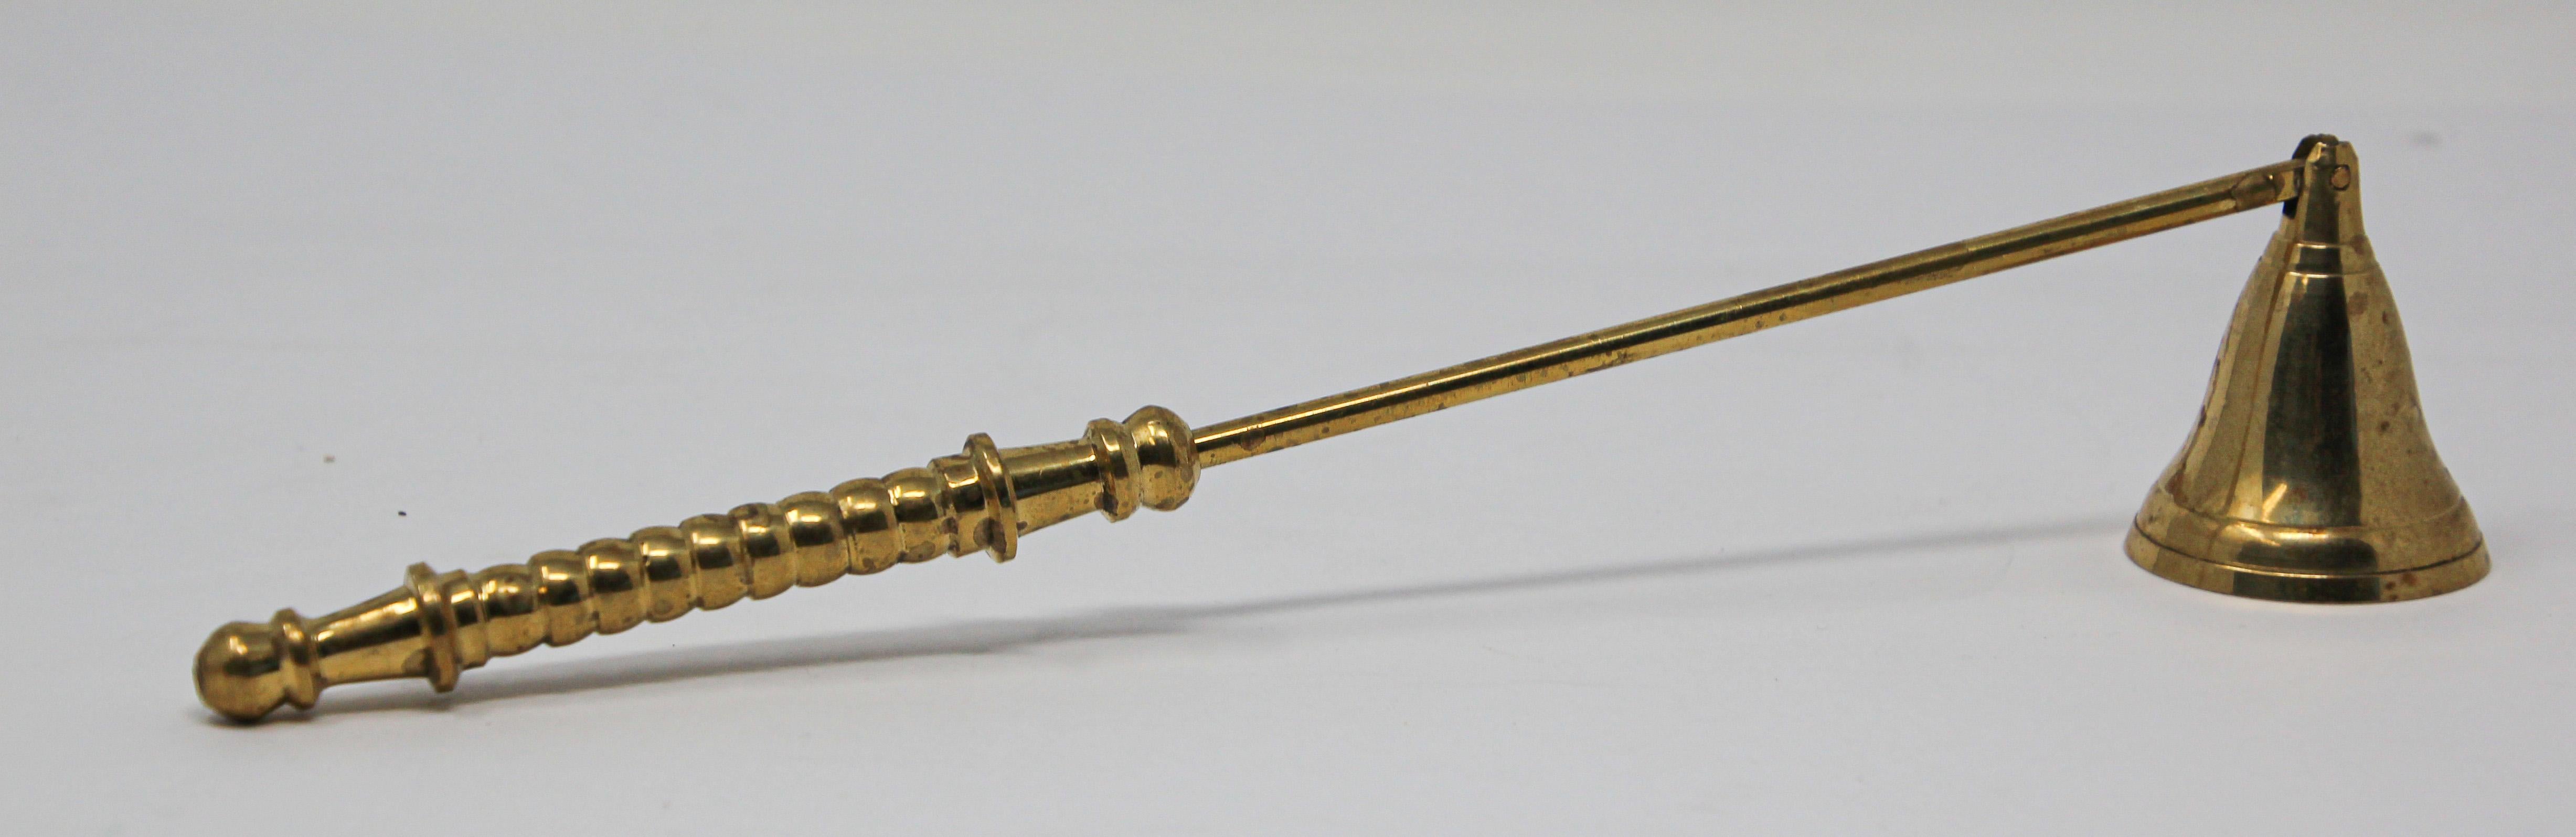 Vintage Anglo-Indian Polished Brass Candle Snuffer 2